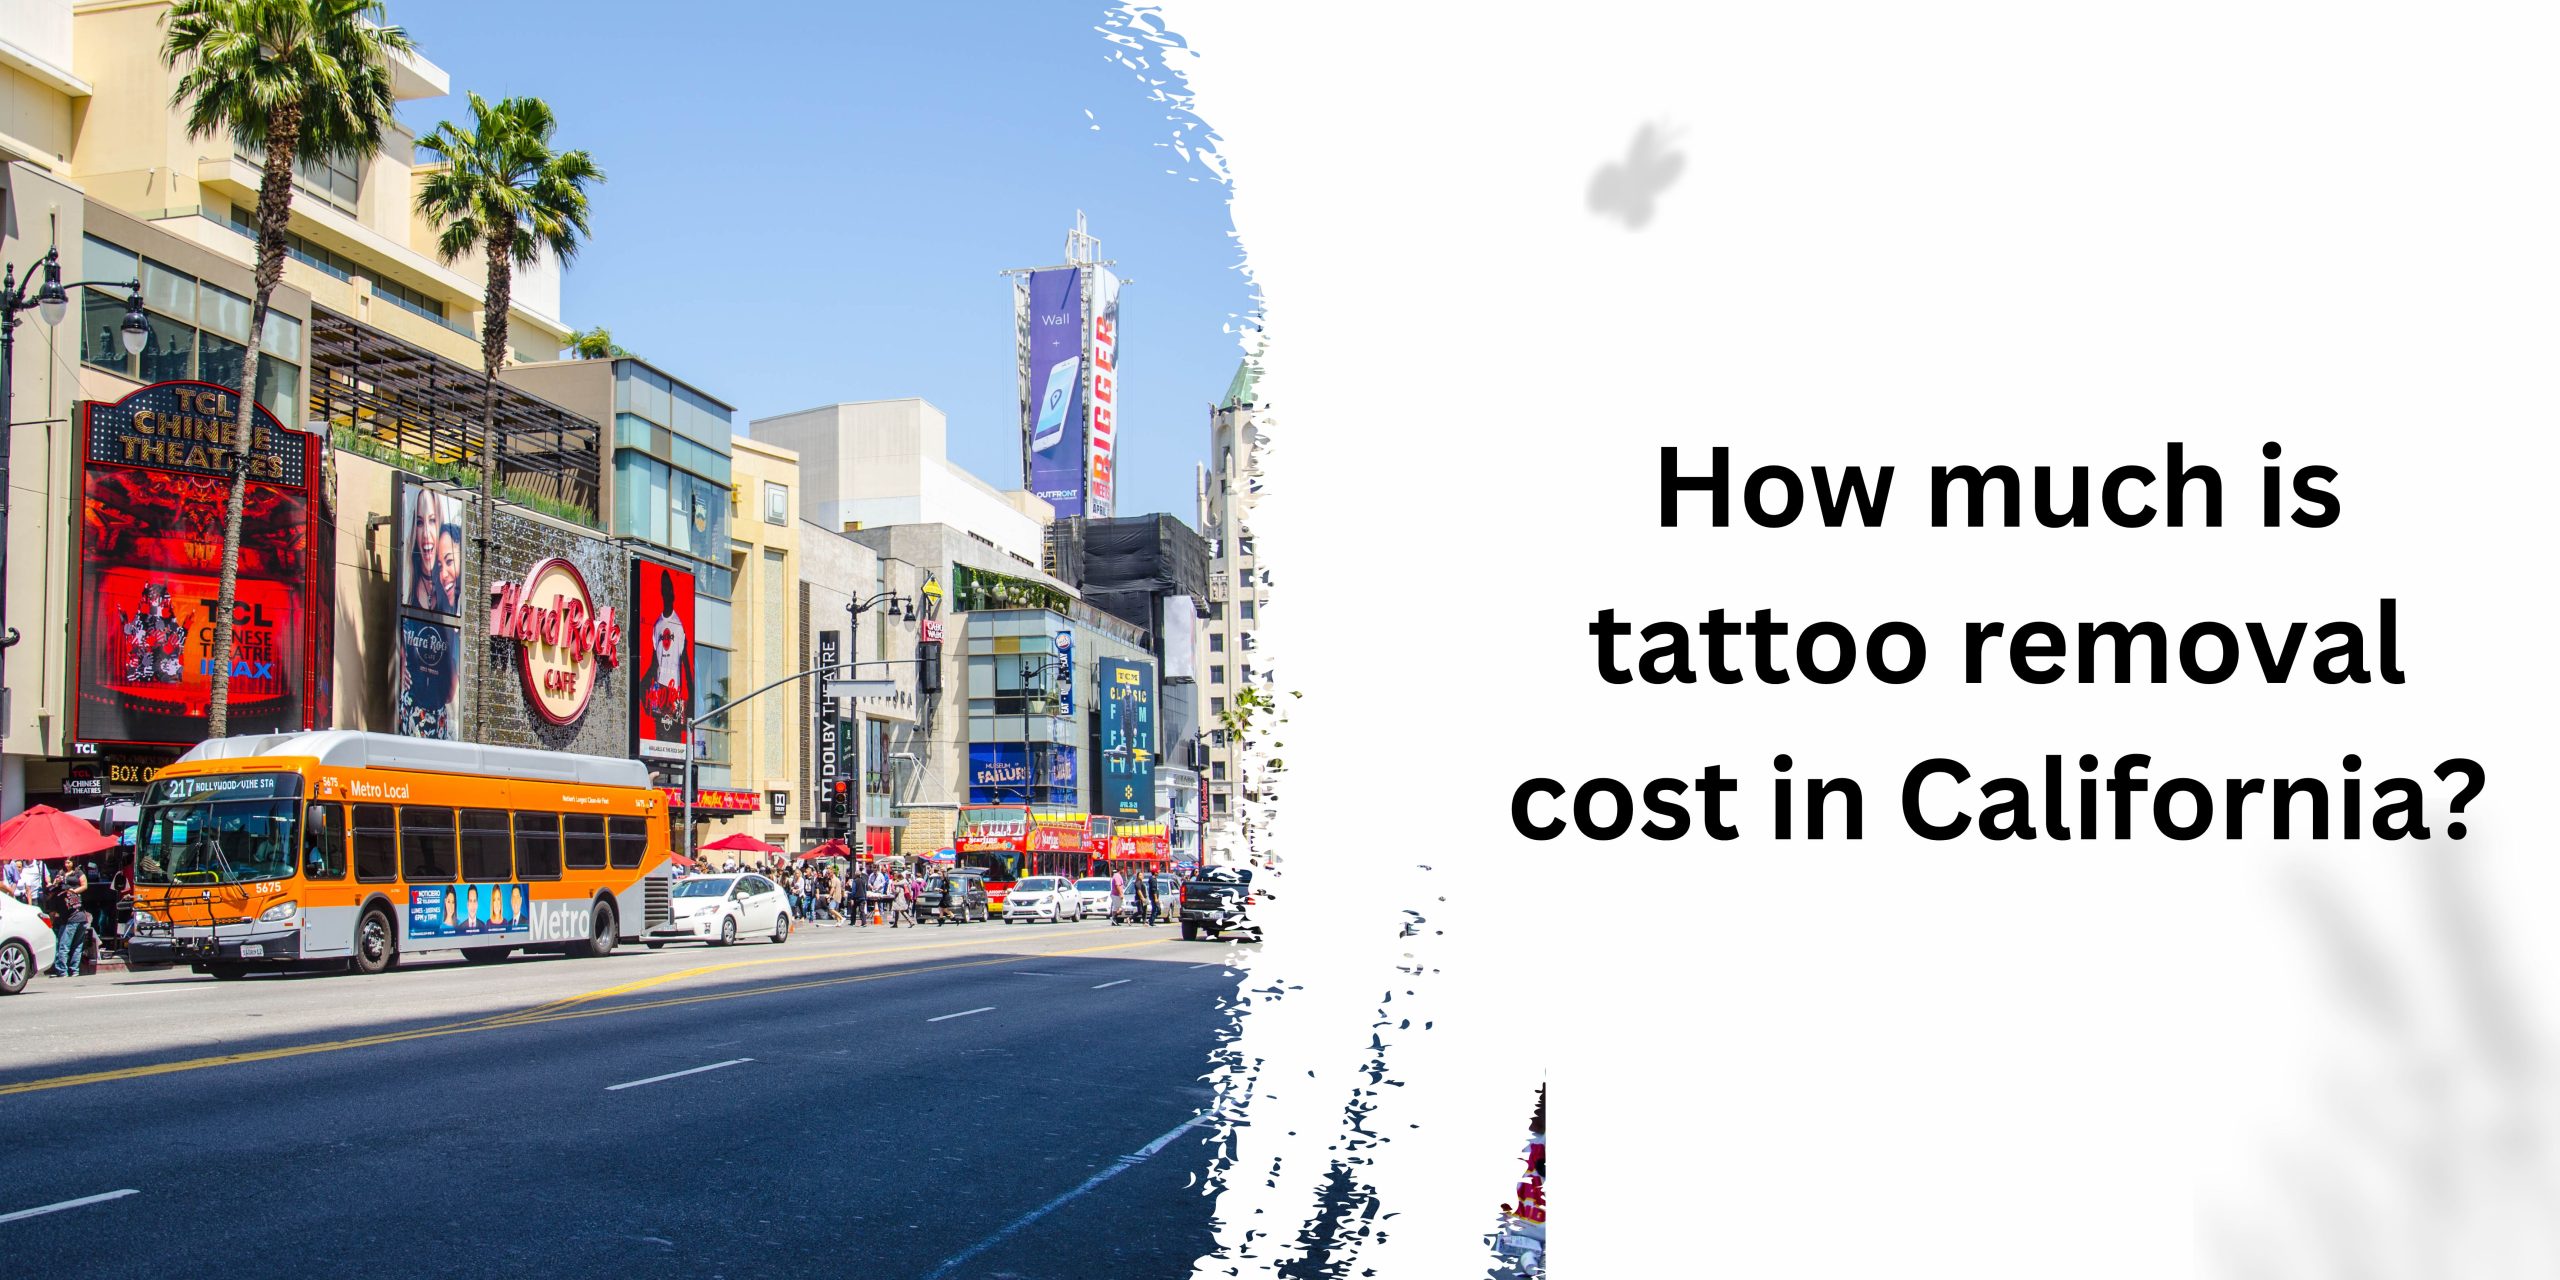 How much is tattoo removal cost in California